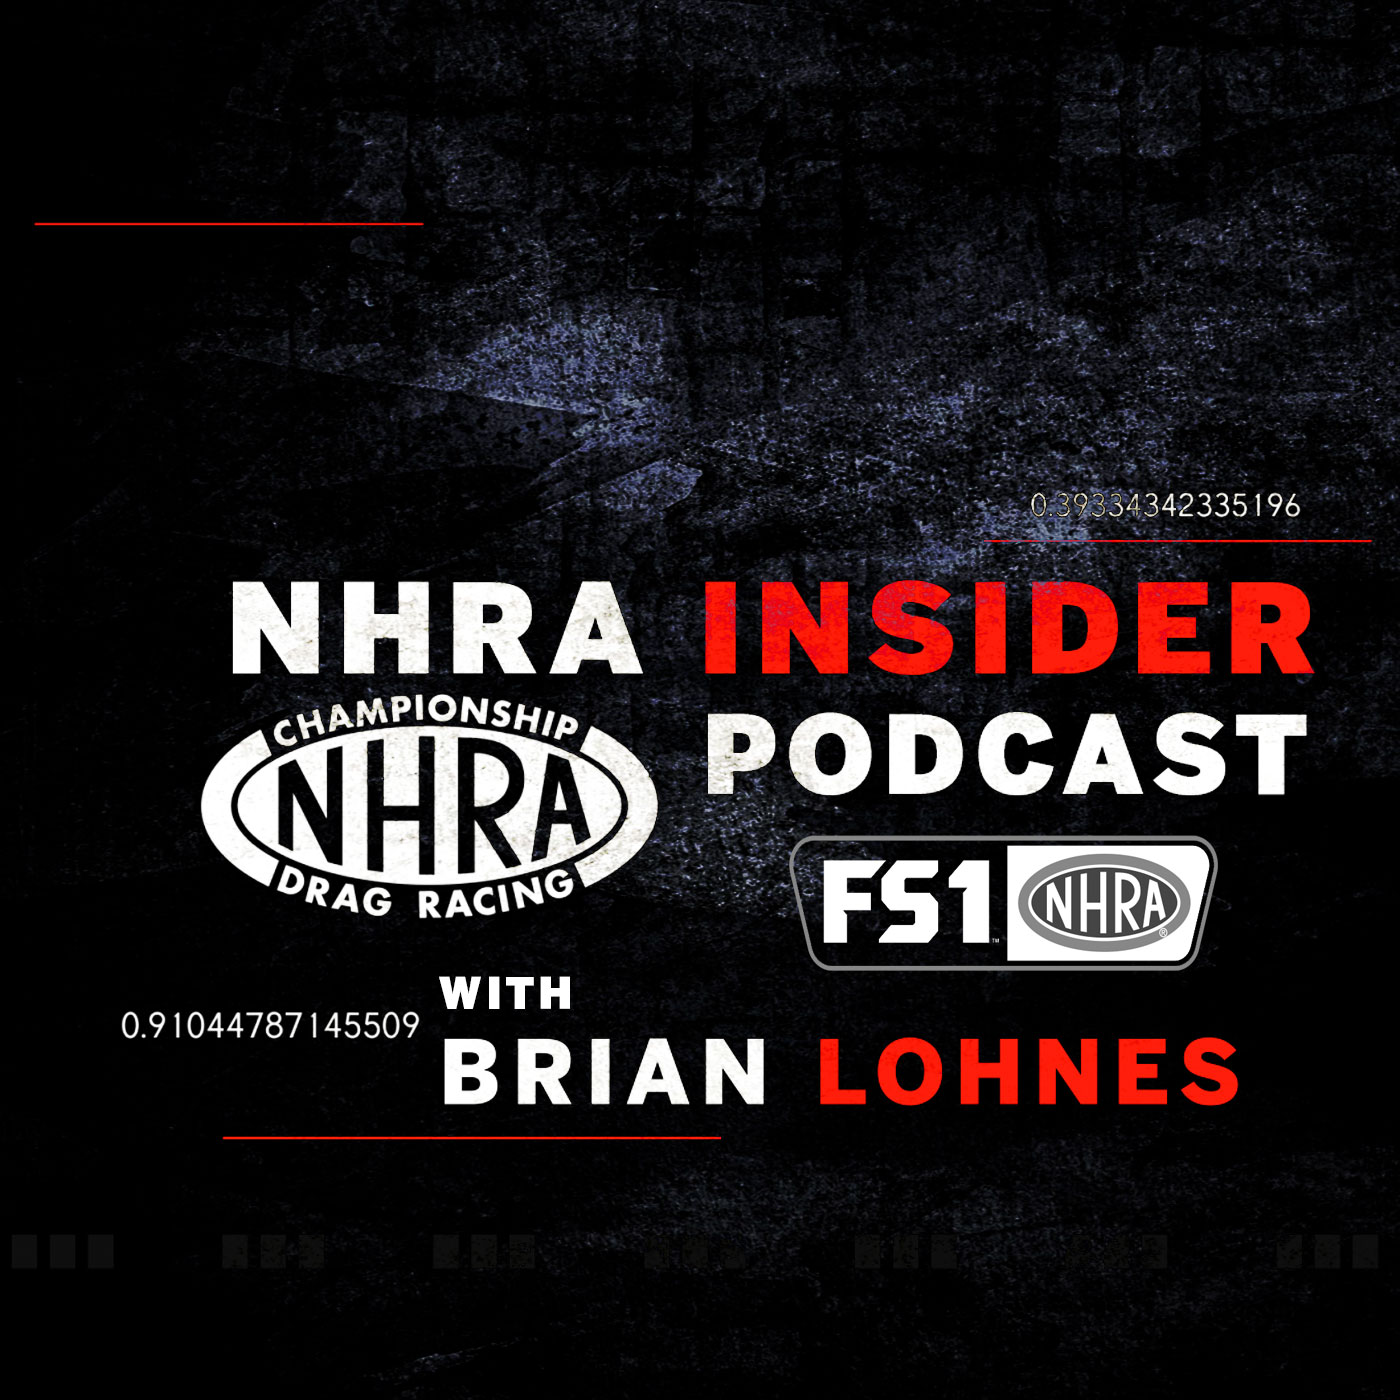 Listen Up: The NHRA Insider Podcast Big Indy Pre-Show – Talking The US Nationals!